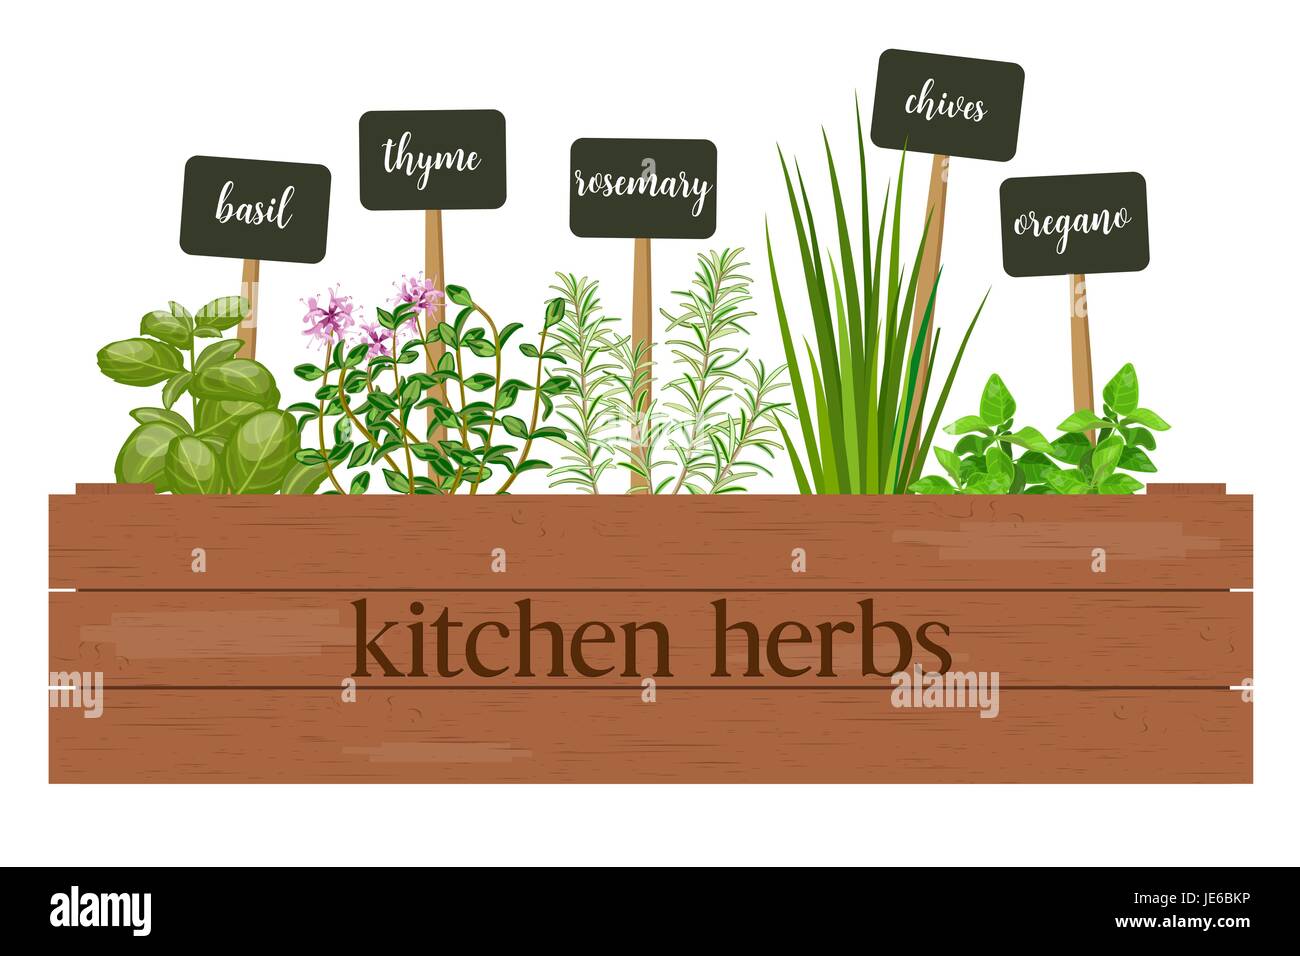 Wooden crate of farm fresh cooking herbs with labels in wooden box. Greenery basil, rosemary, chives, thyme, oregano with text. Stock Vector